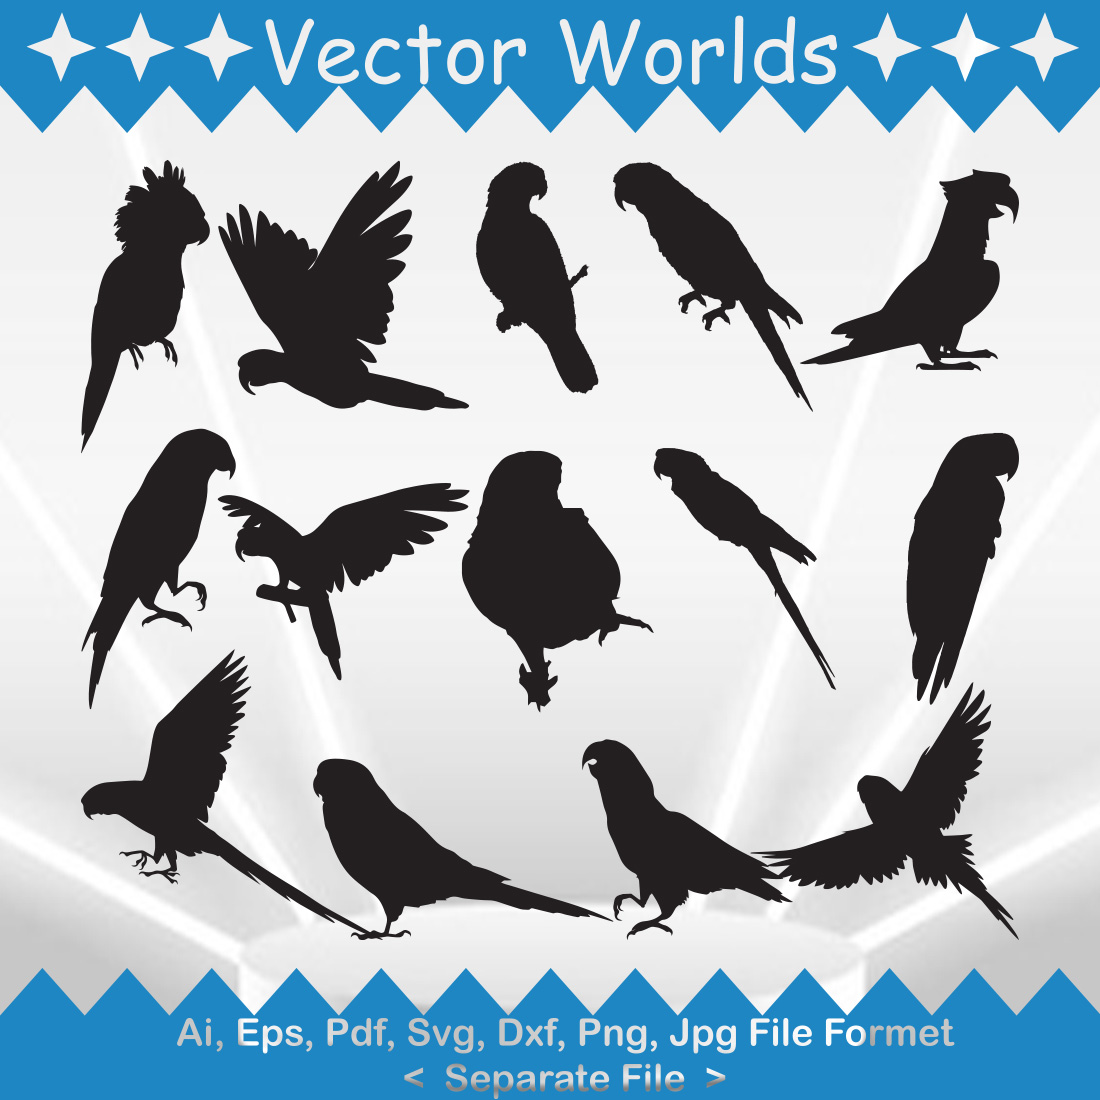 Set of birds silhouettes on a blue and white background.